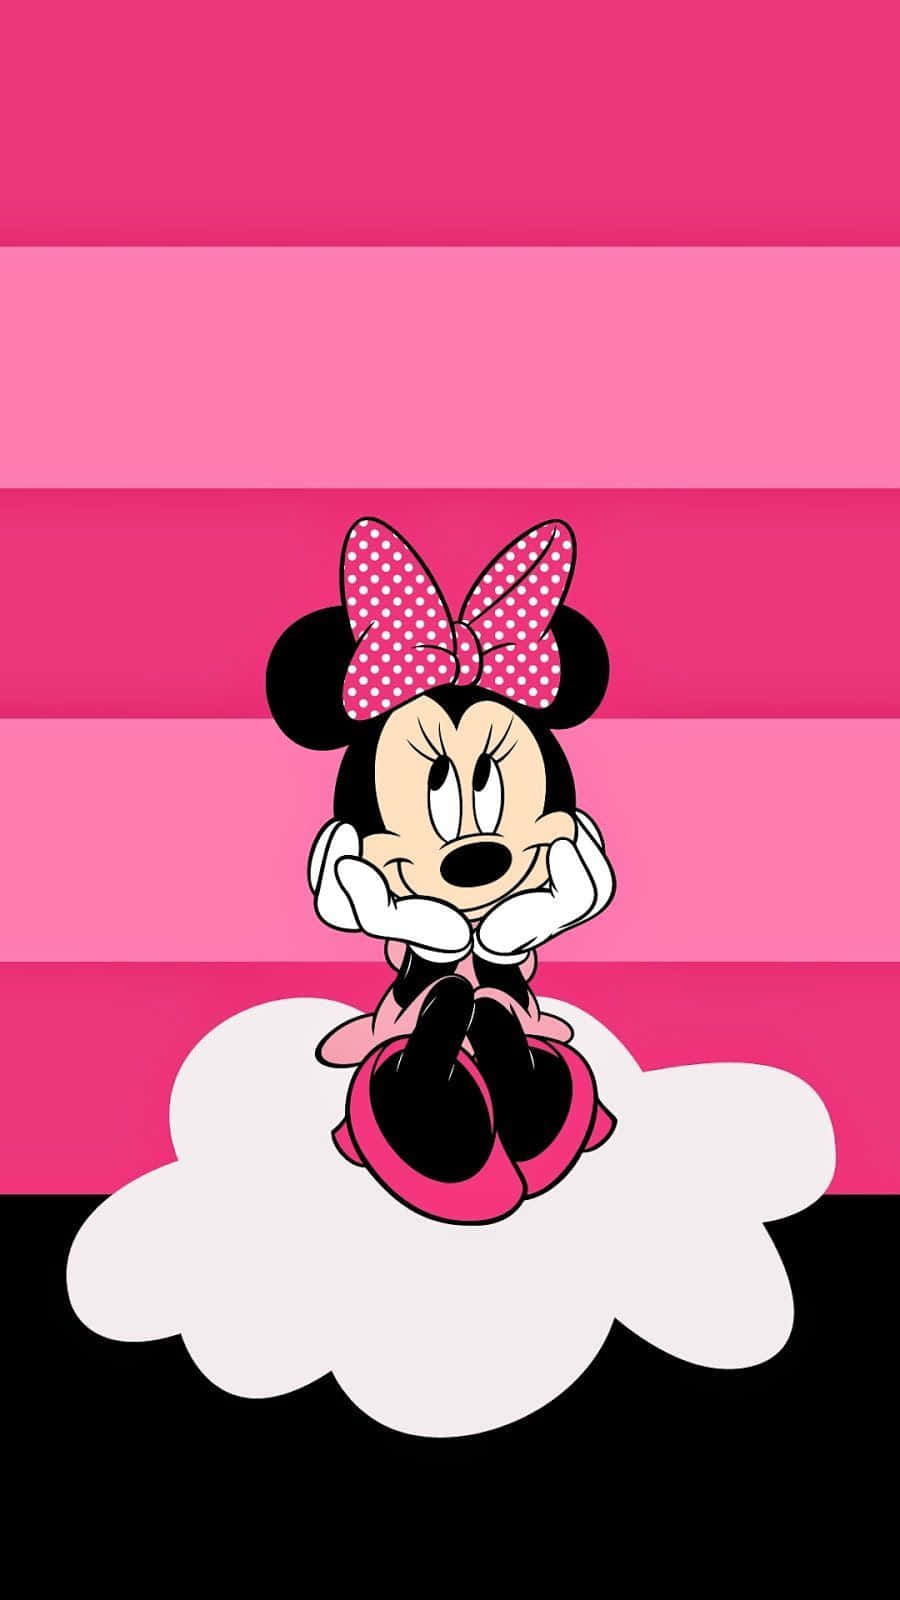 Minnie Mouse Iconic Look In Pink Wallpaper